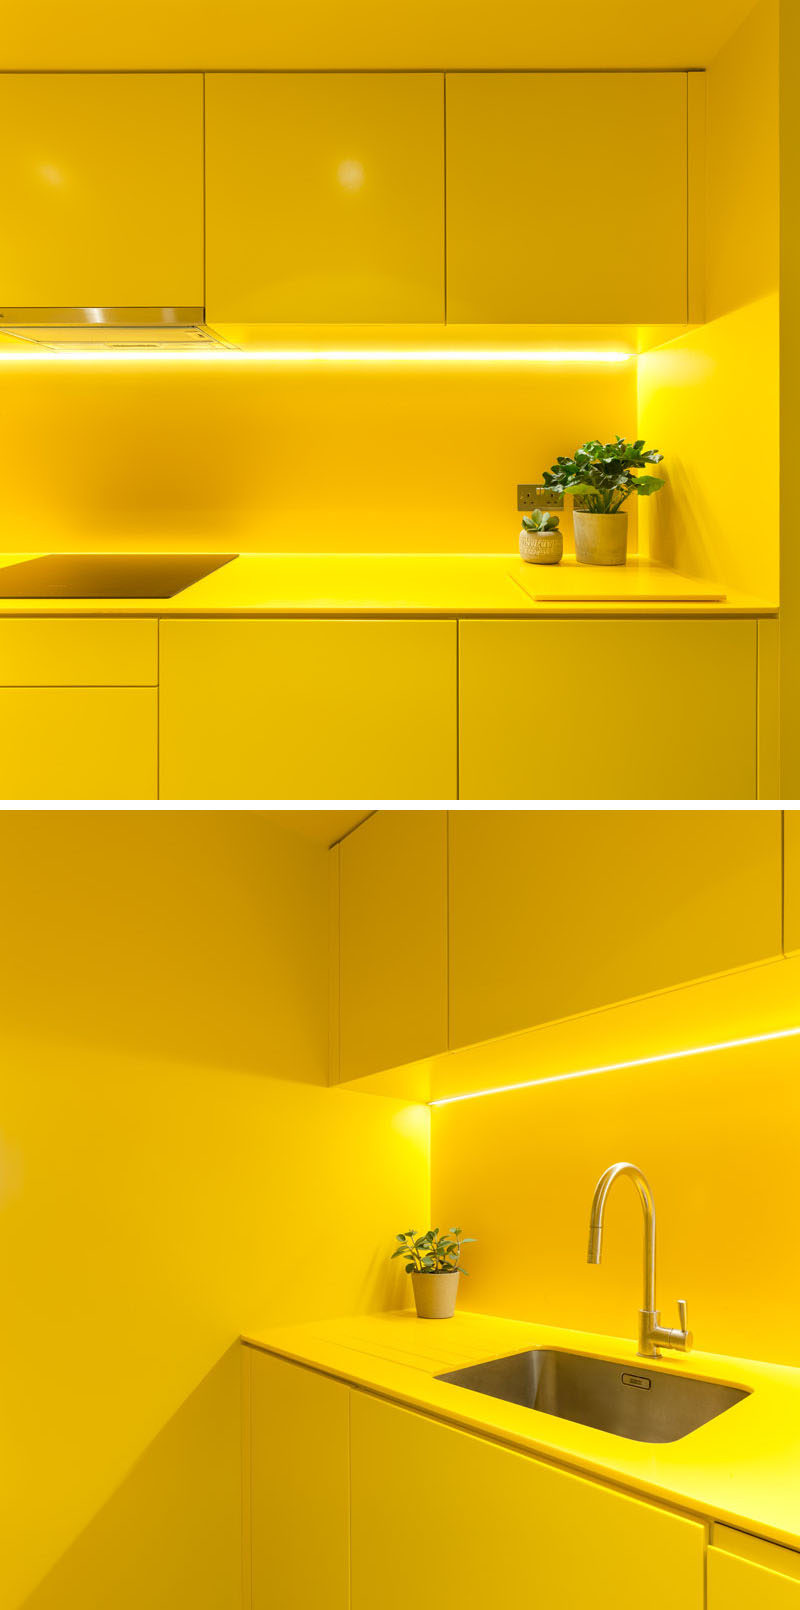 This modern kitchen has bright yellow minimalist, hardware free cabinets that complement the yellow ceiling, countertops and backsplash. #YellowKitchen #ModernKitchen #KitchenDesign